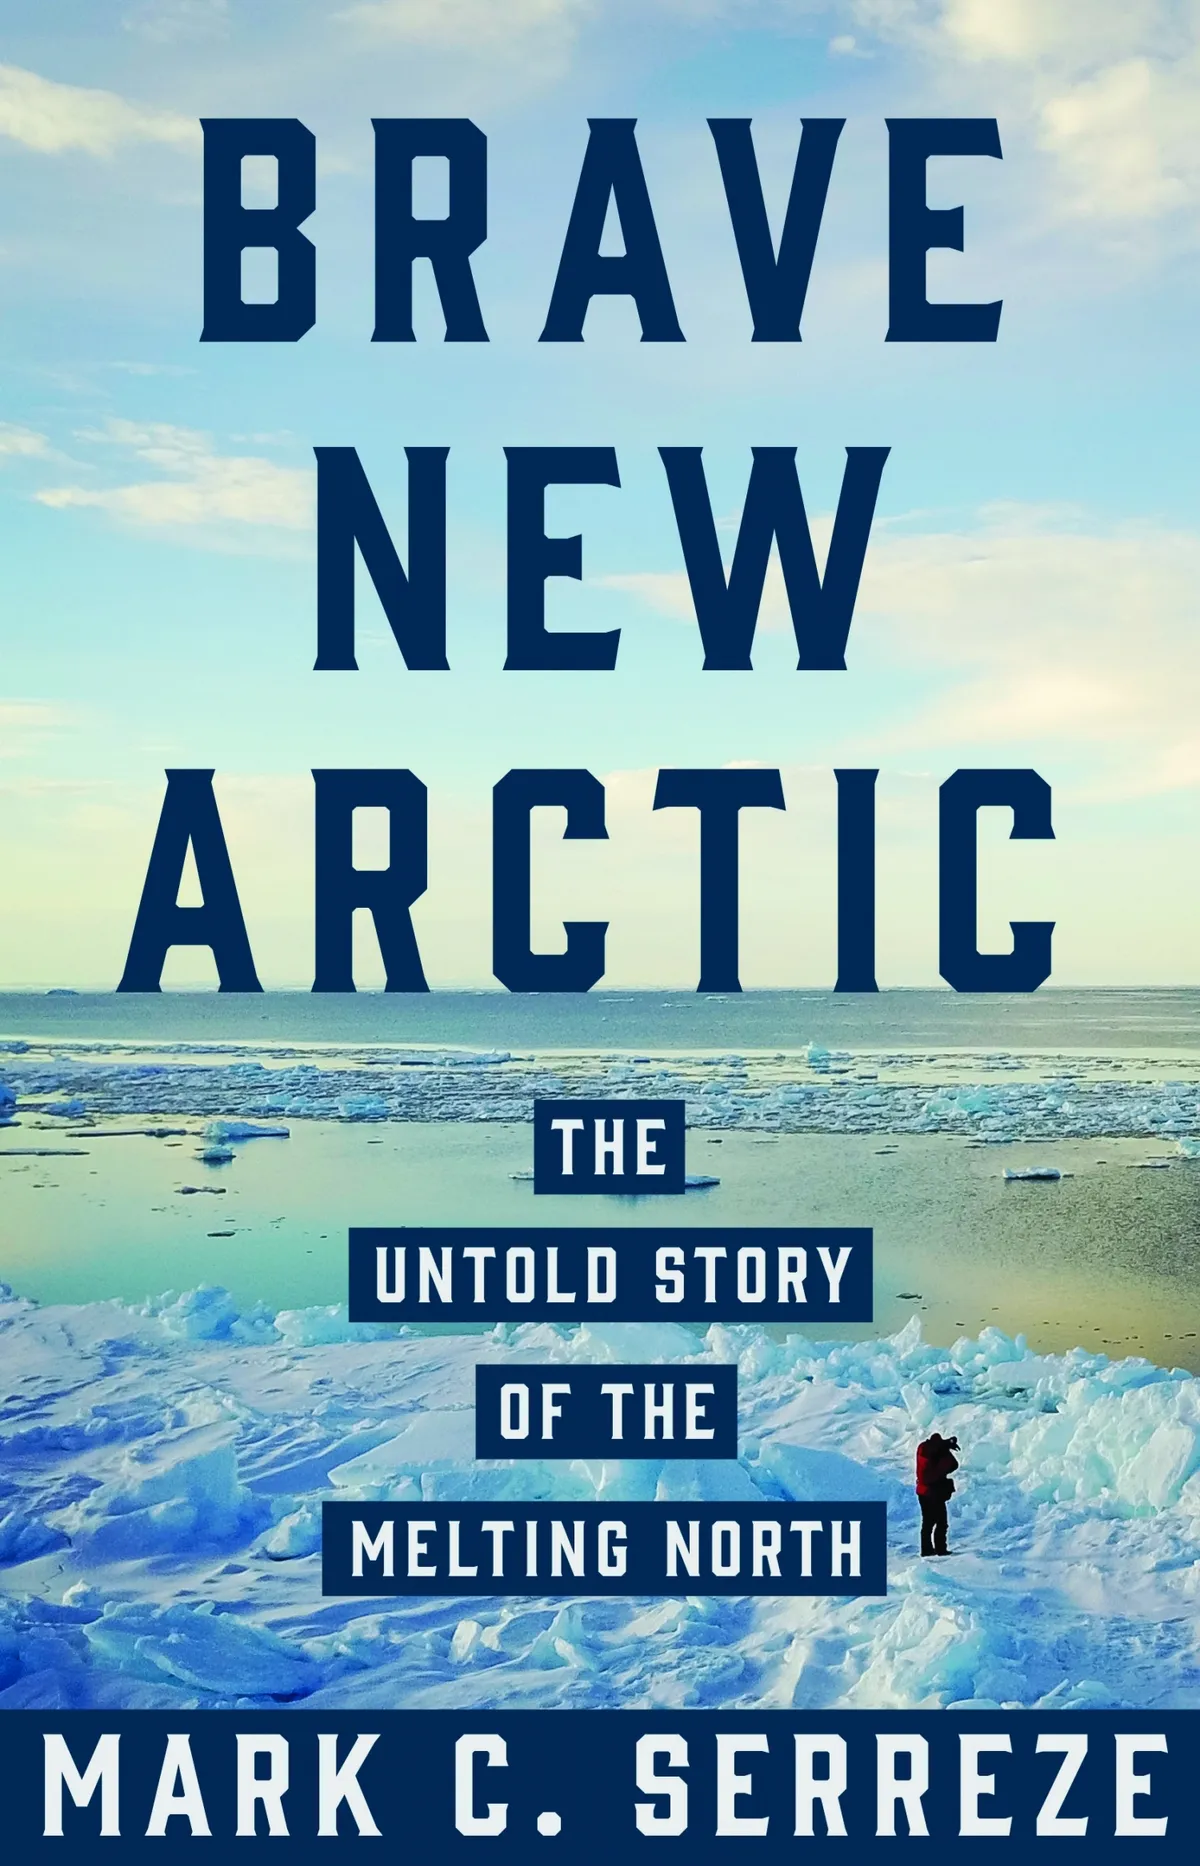 Brave New Arctic: The Untold Story of the Melting North by Mark C. Serreze is available now (£19.99, Princeton University Press)